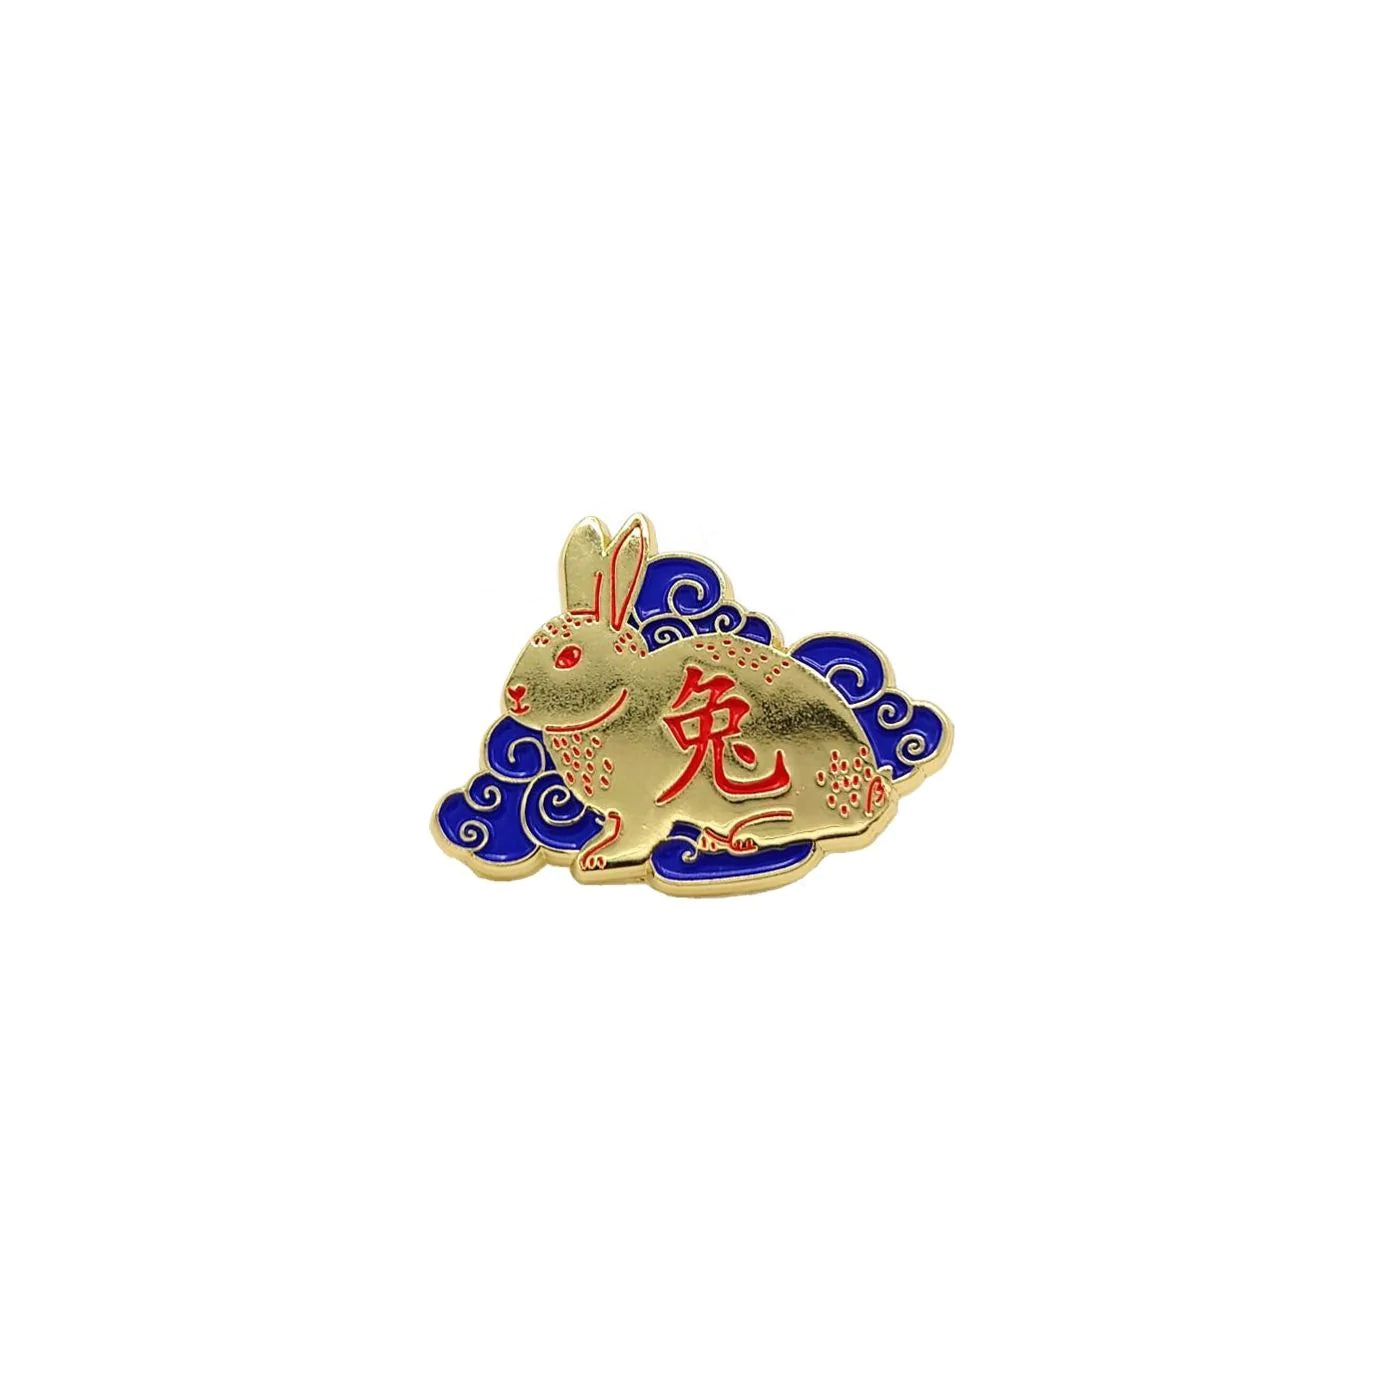 The golden rabbit with red chinese character in the body, it's sitting amongst blue clouds. White backdrop.